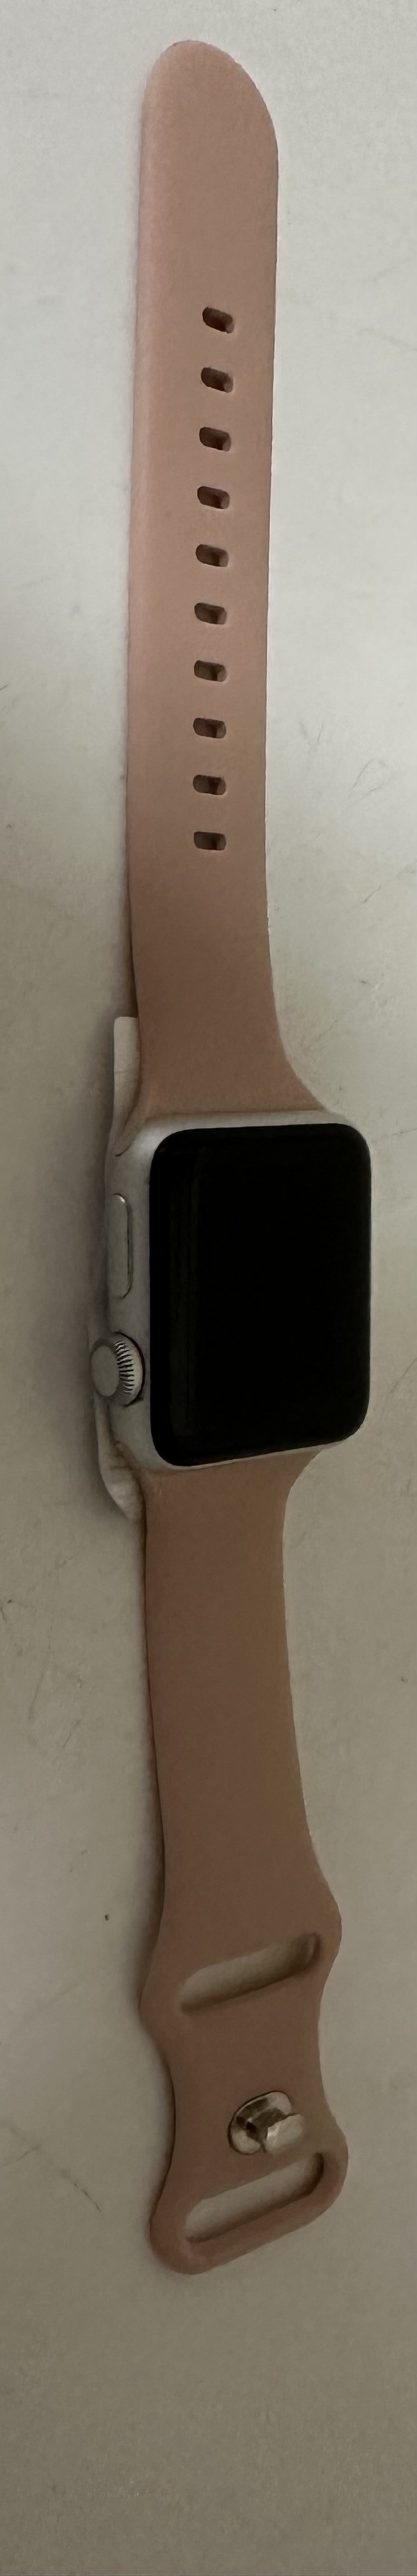 Apple Watch Series 3 - 38mm - Unboxed -Rose Gold